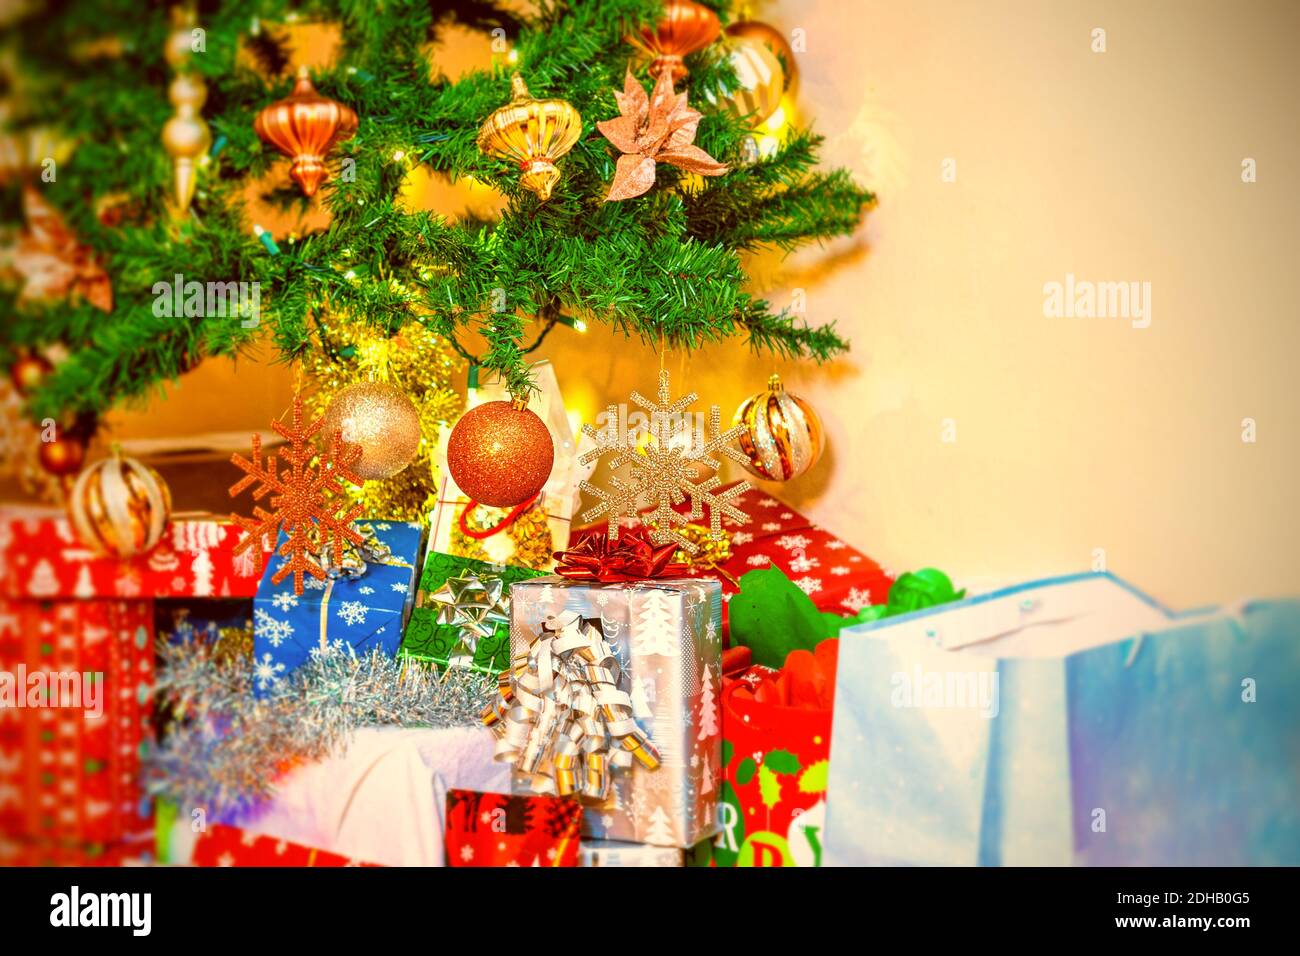 Christmas gifts under the Christmas Tree Stock Photo